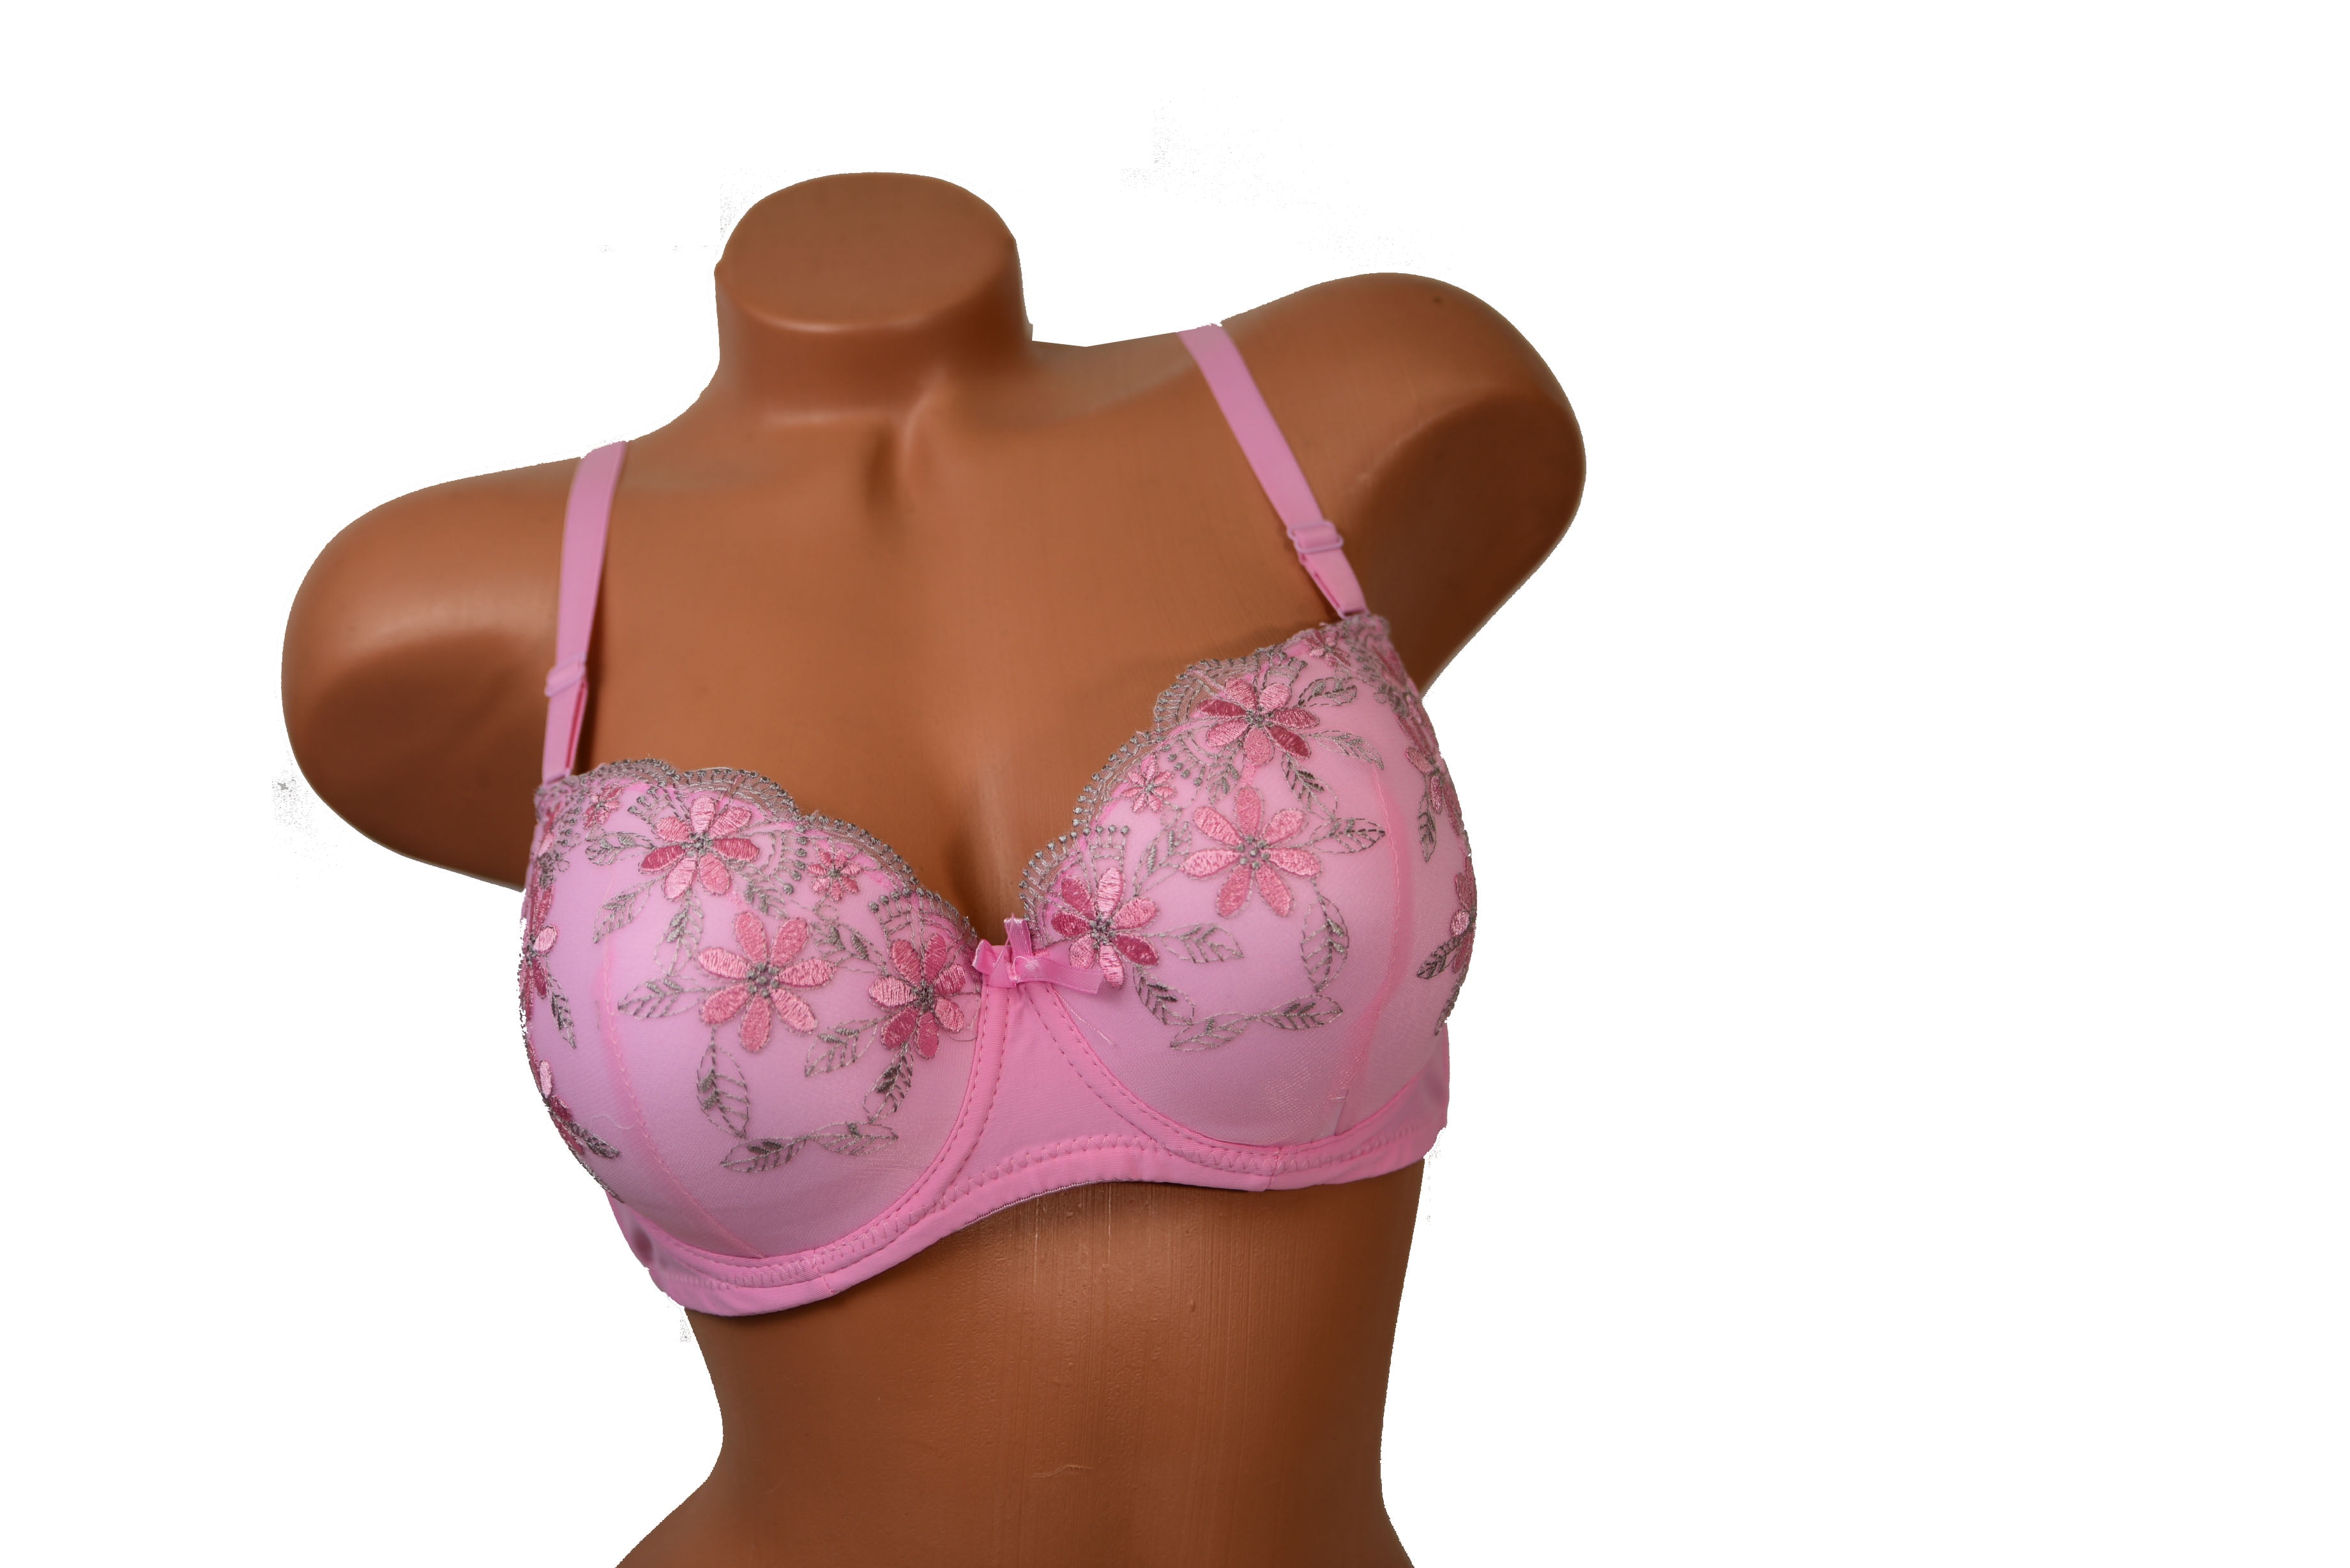 Women Bras 6 pack of Bra B cup C cup Size 34C (S6674)